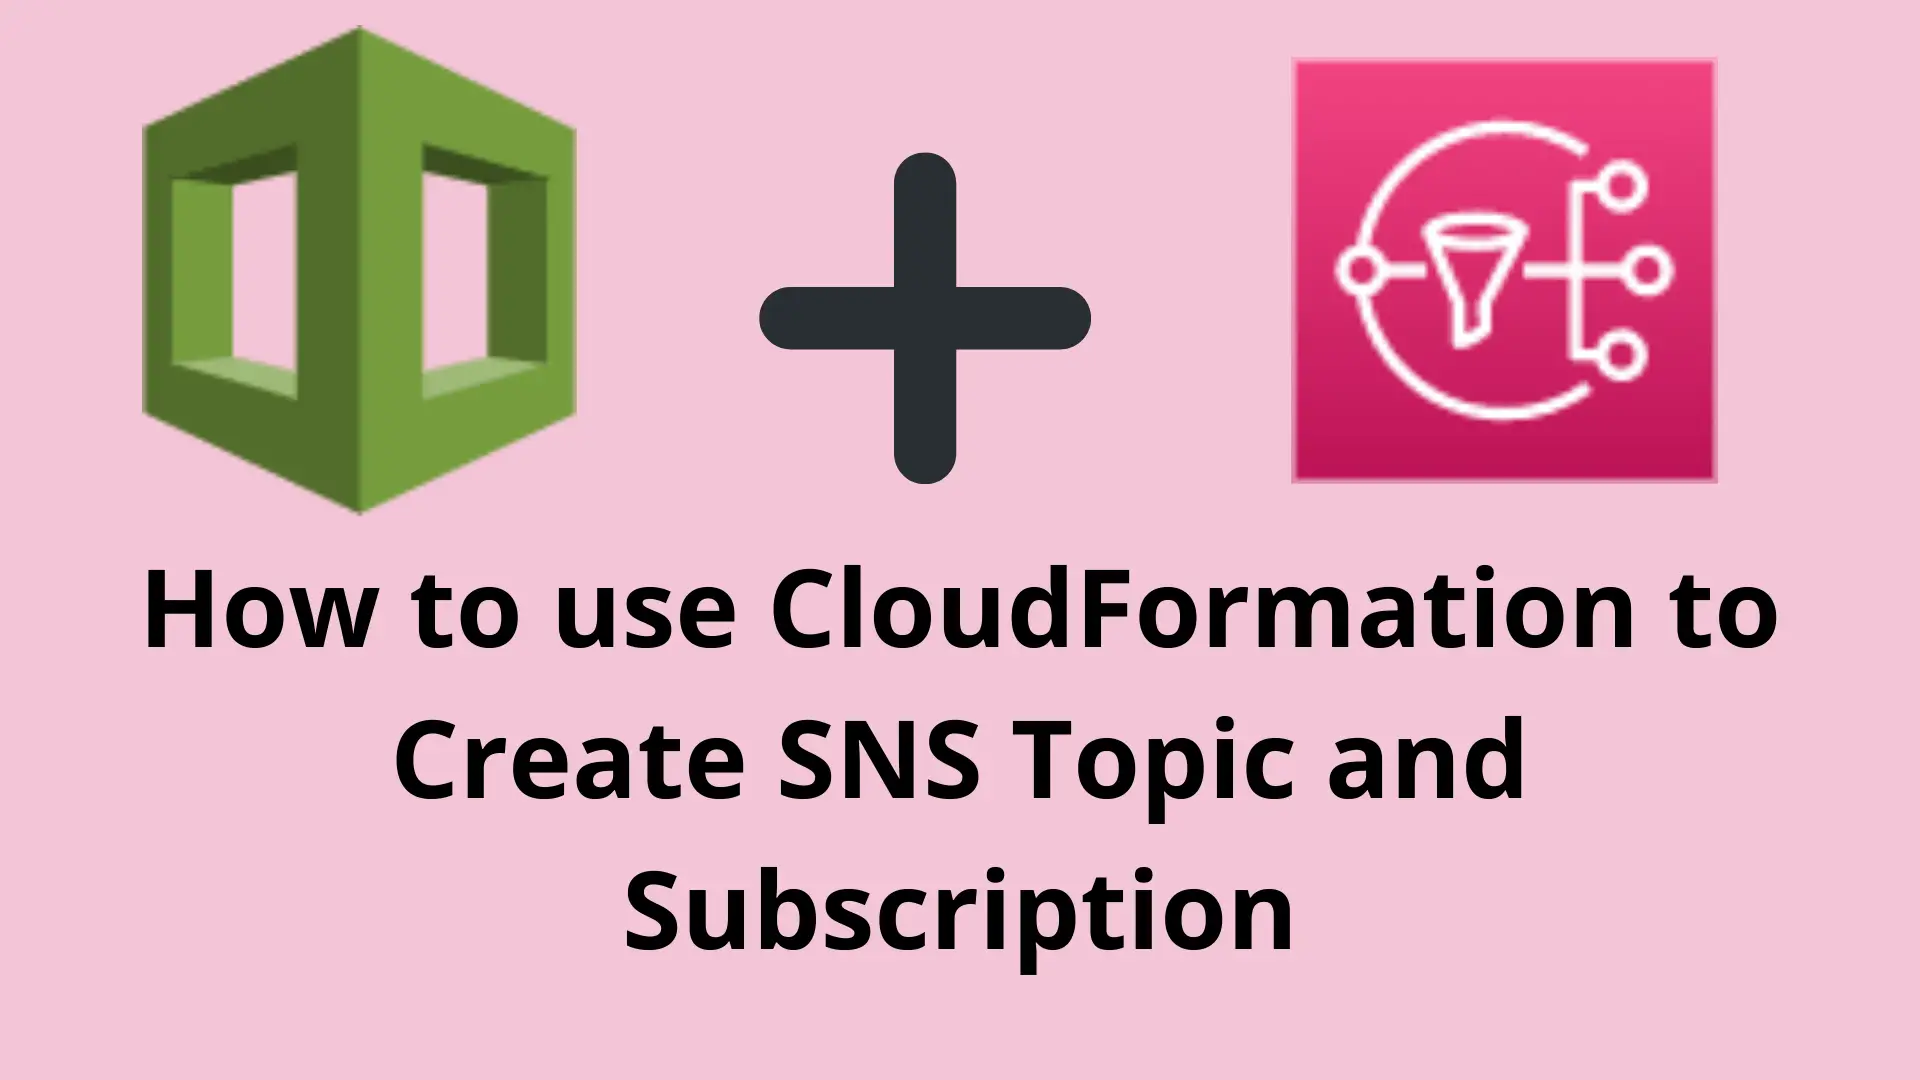 How to use CloudFormation to Create SNS Topic and Subscription